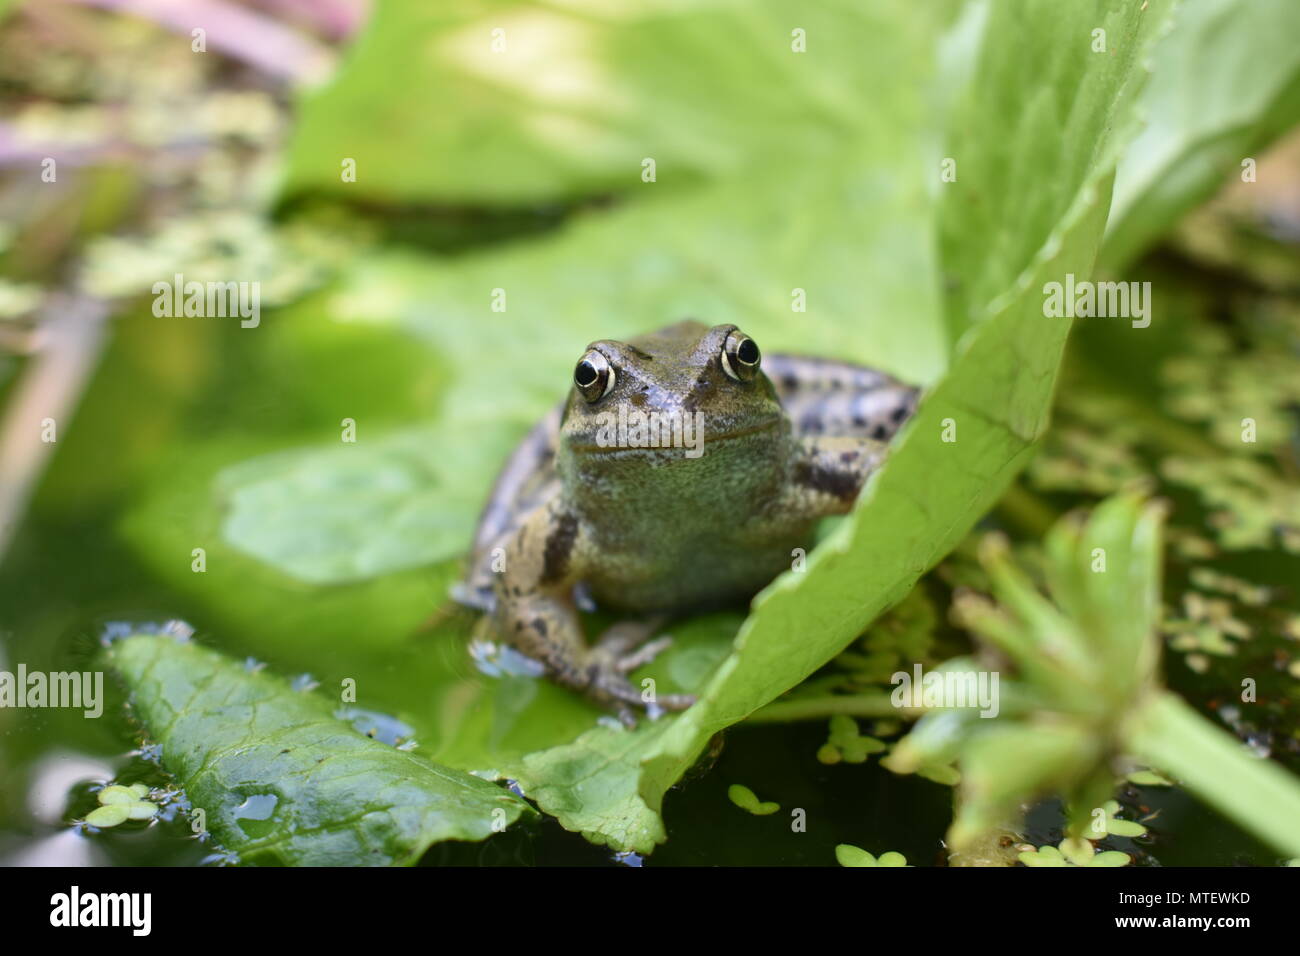 Frog in a local pond Stock Photo